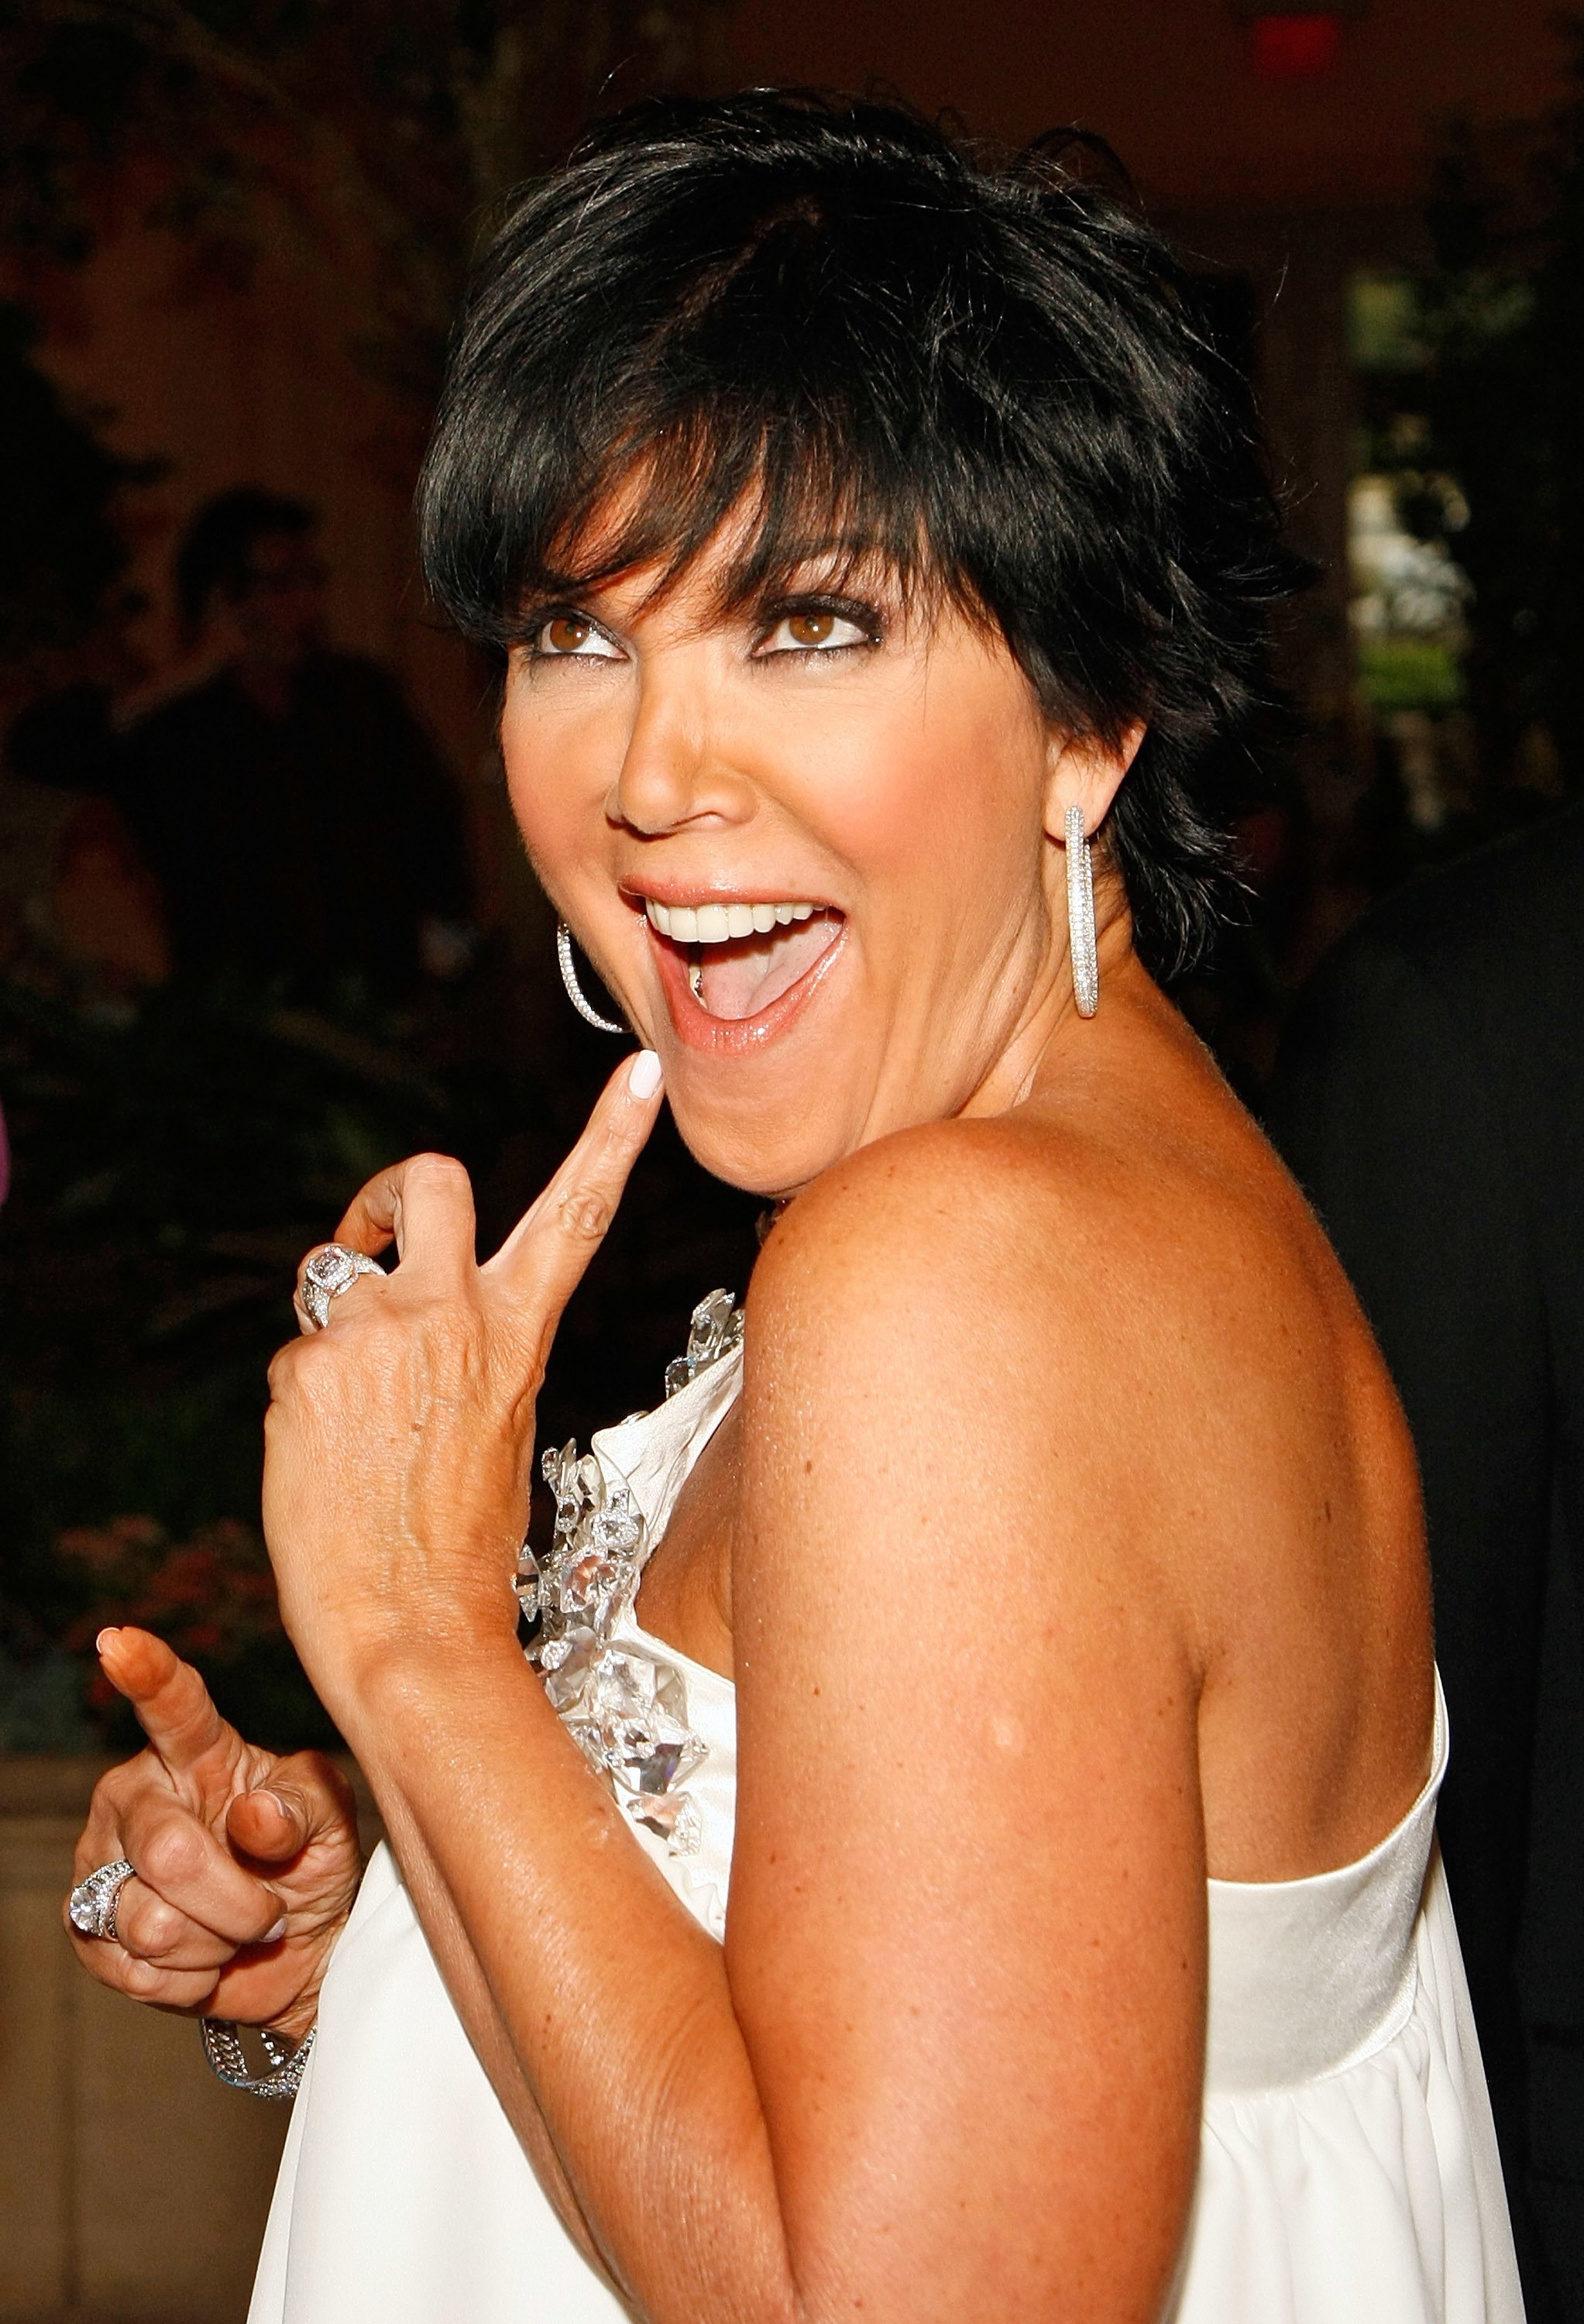  Kris Jenner at the Simon G. Jewelry "Spring Bling" event benefiting the Lili Claire Foundation in 2009 | Source: Getty Images